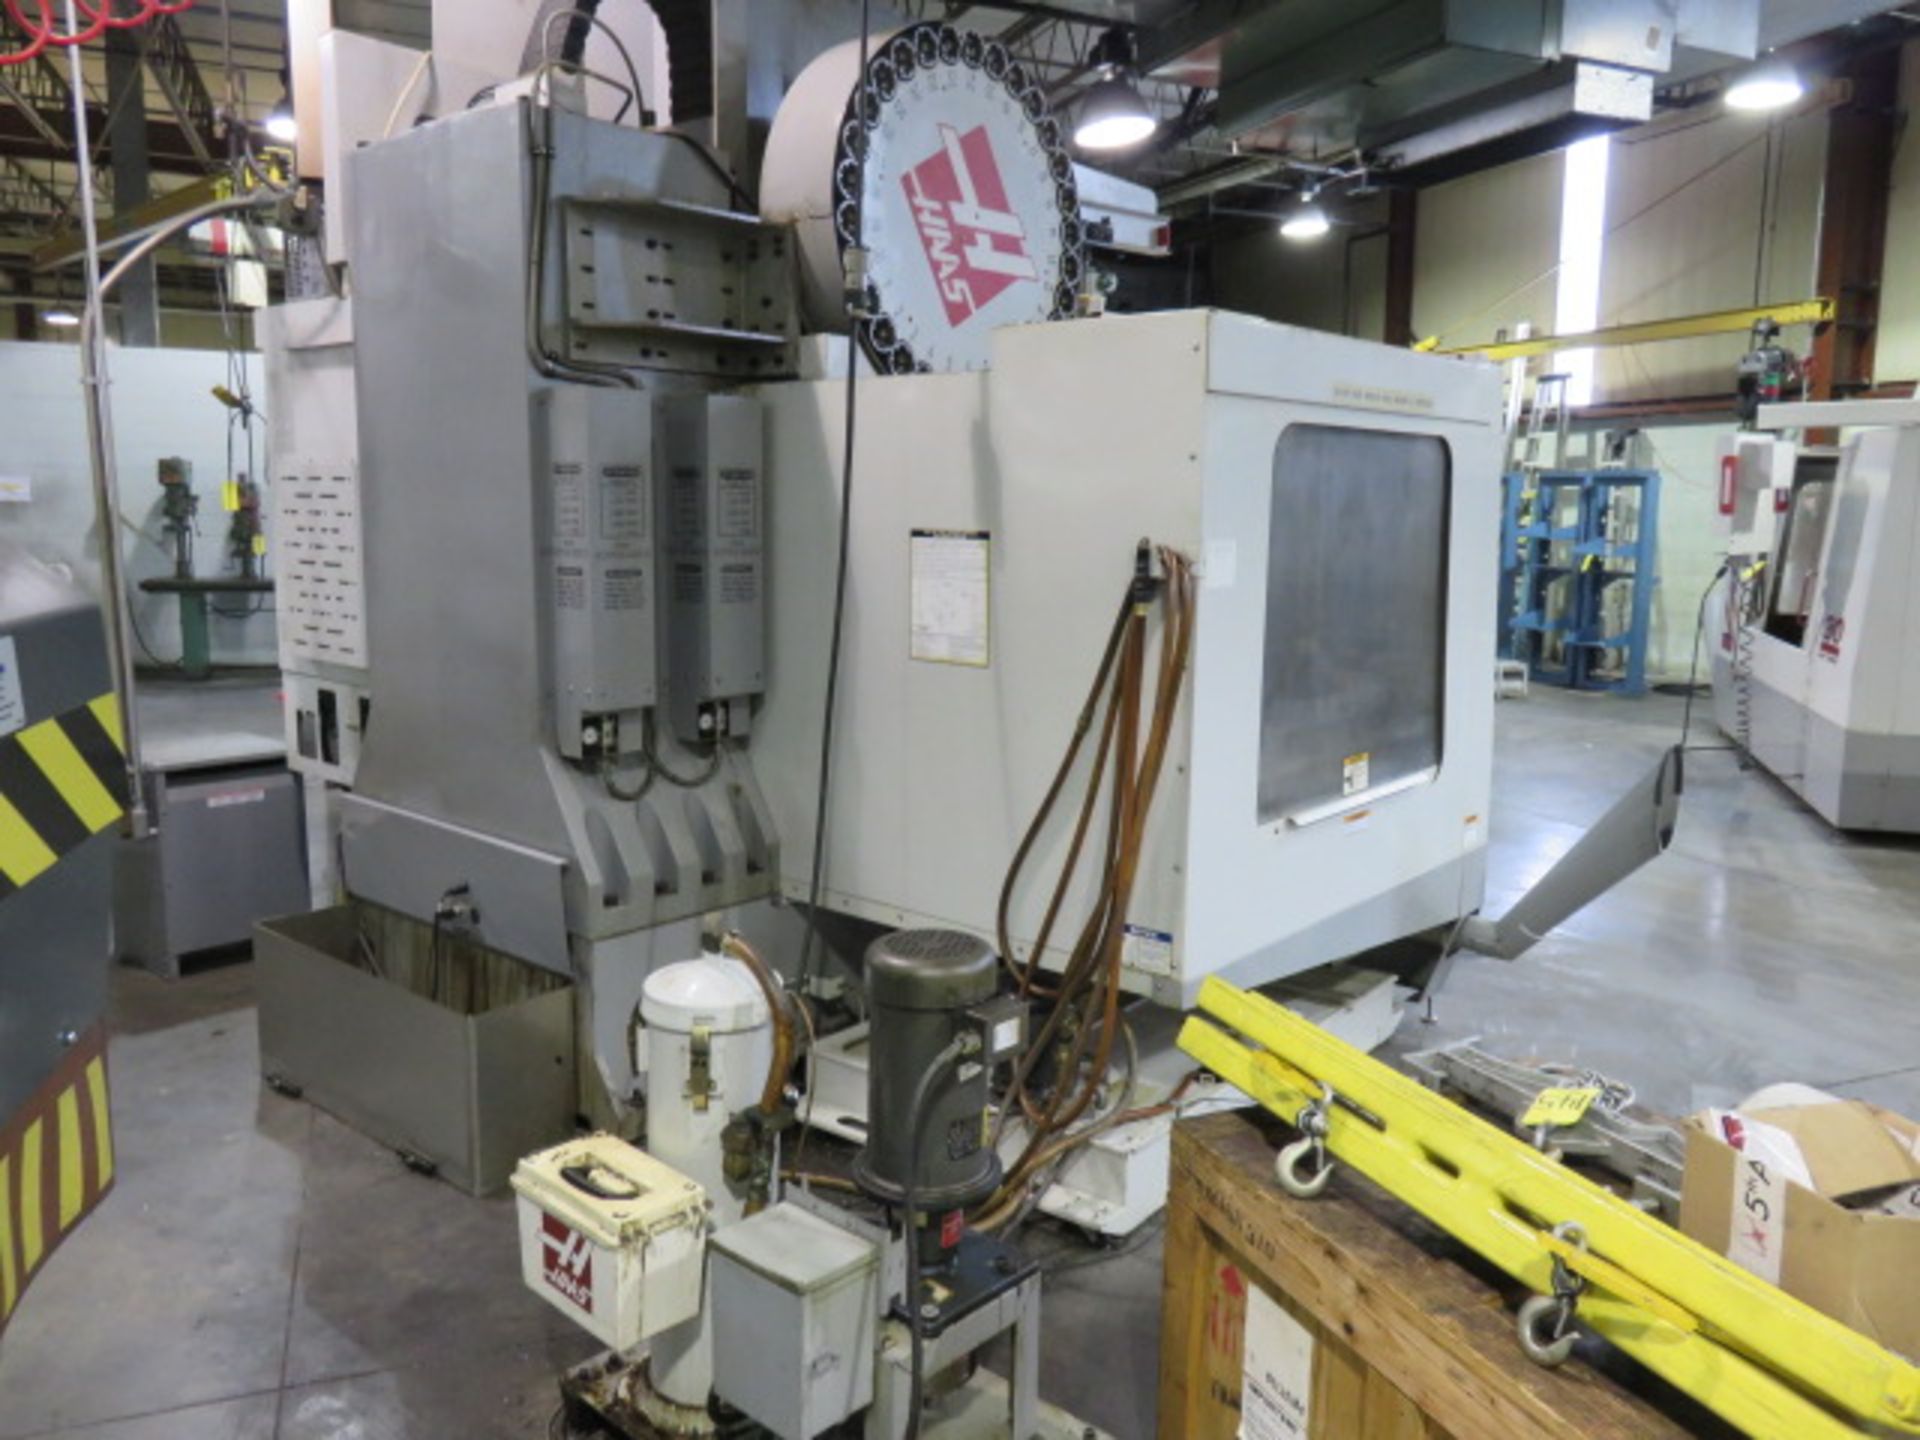 2006 HAAS VF-6/50 CNC VERTICAL MACHINING CENTER, S/N 1050547, WIRED FOR 5 AXIS , (REPLACED SPNDL.) - Image 7 of 7